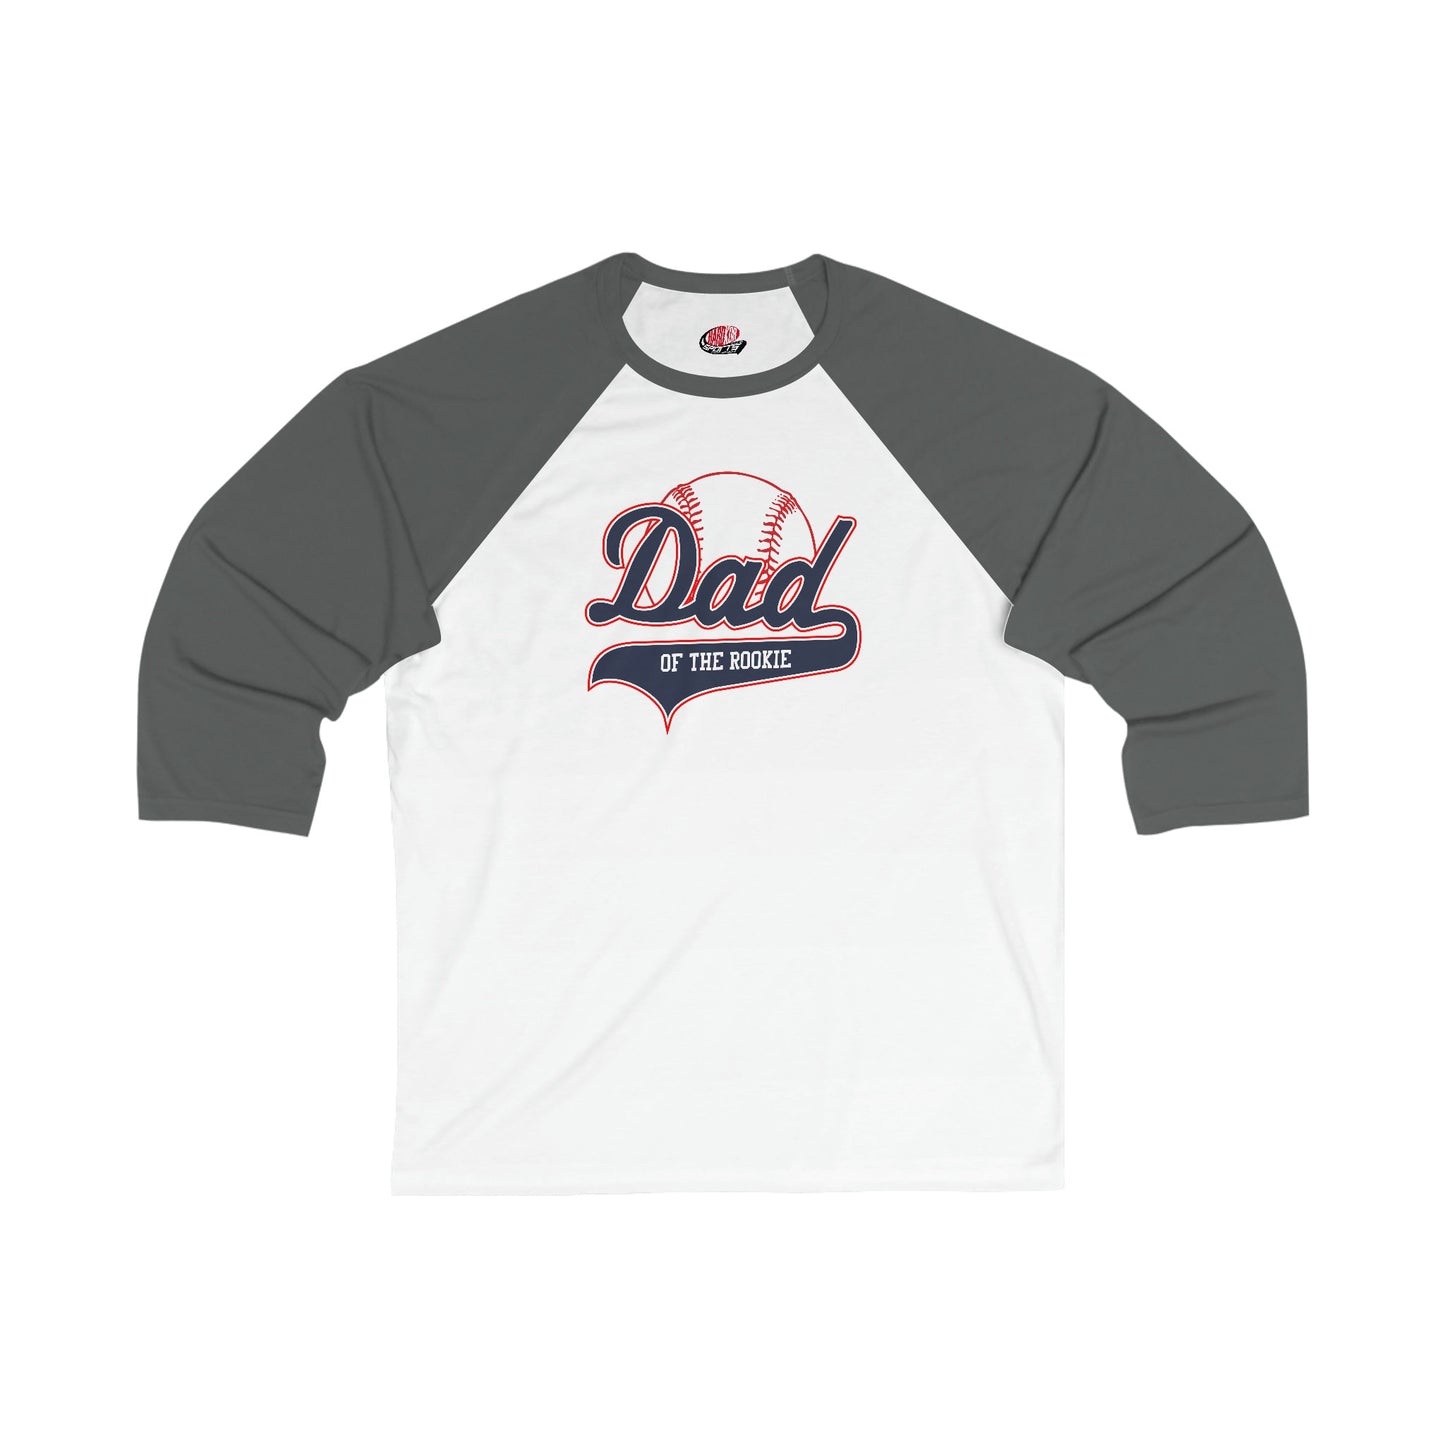 Dad of the Rookie, Men's fitted 3/4 Sleeve Baseball Tee, Customizable Baseball Shirt, Colorblock Raglan Sleeve, Your Name Number on back